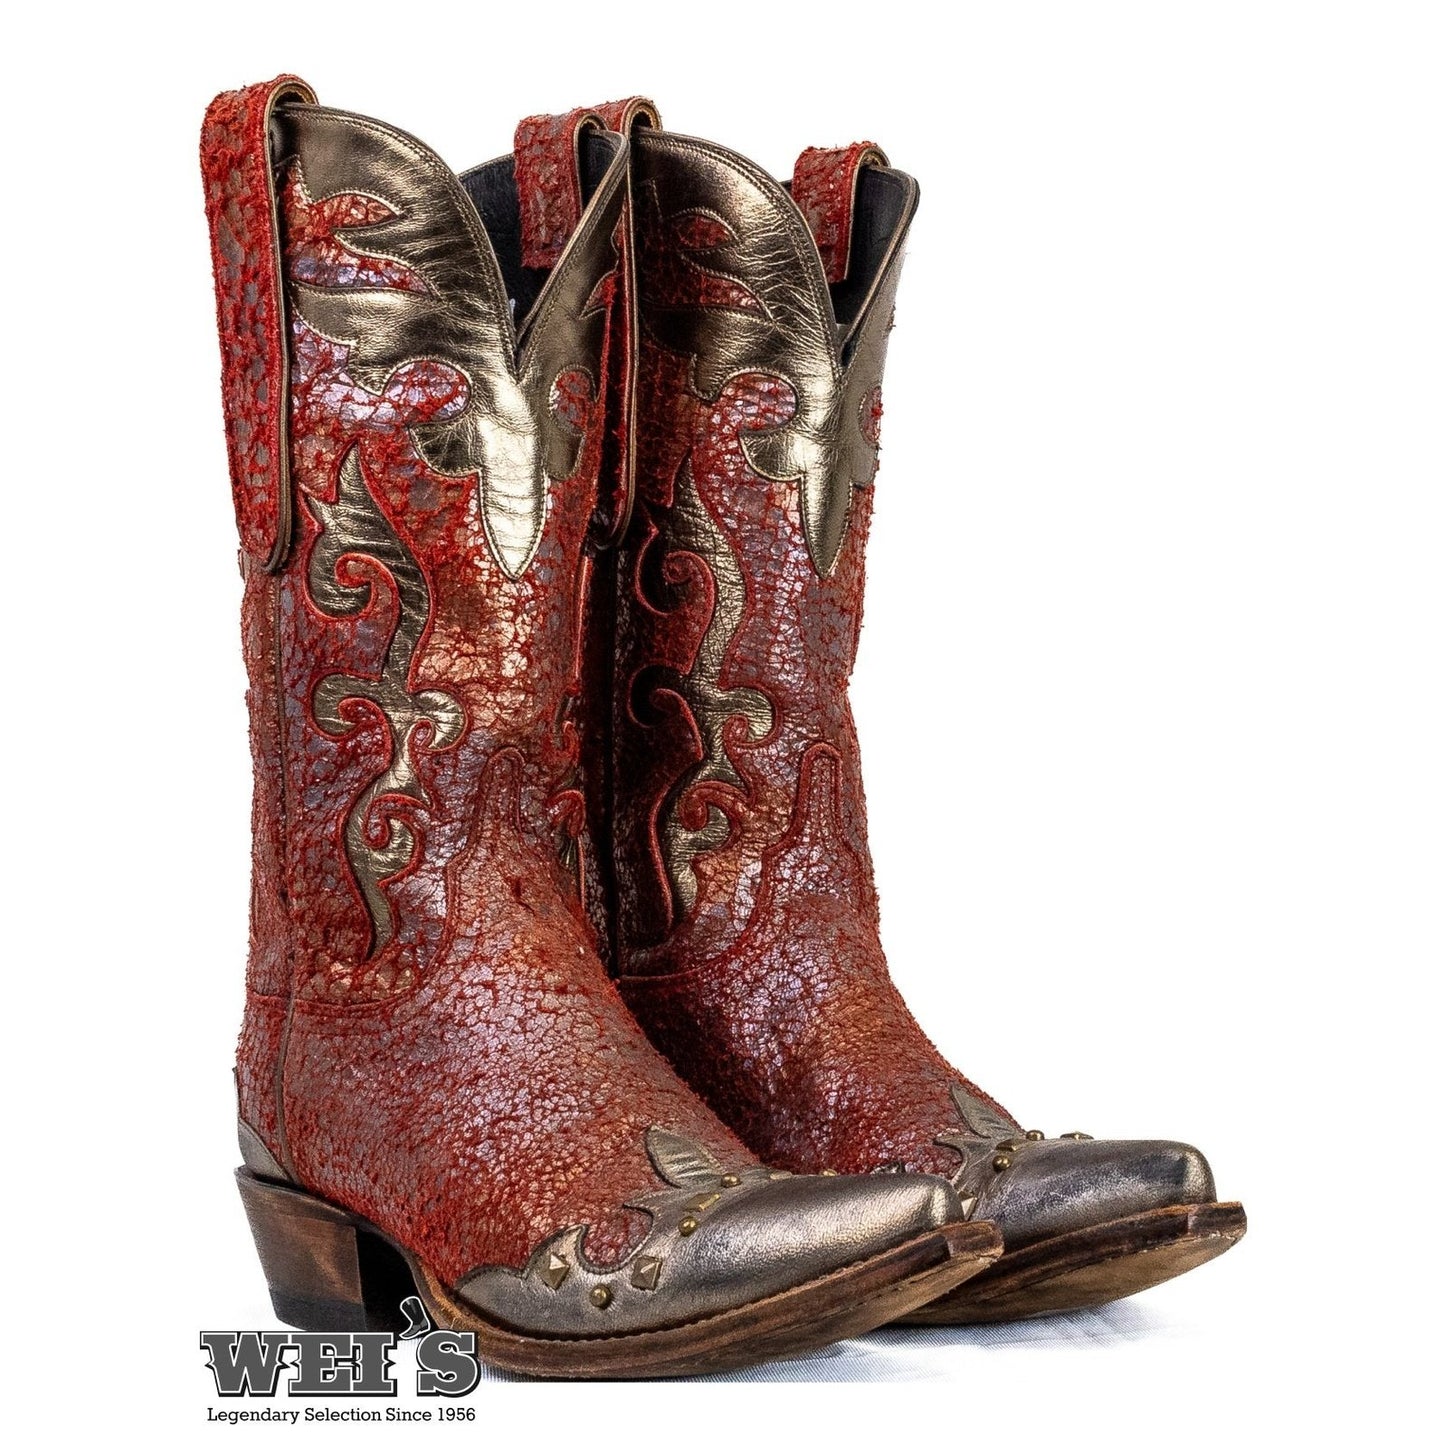 Lucchese Women's Diva Boots DV0013 Clearance - Clearance